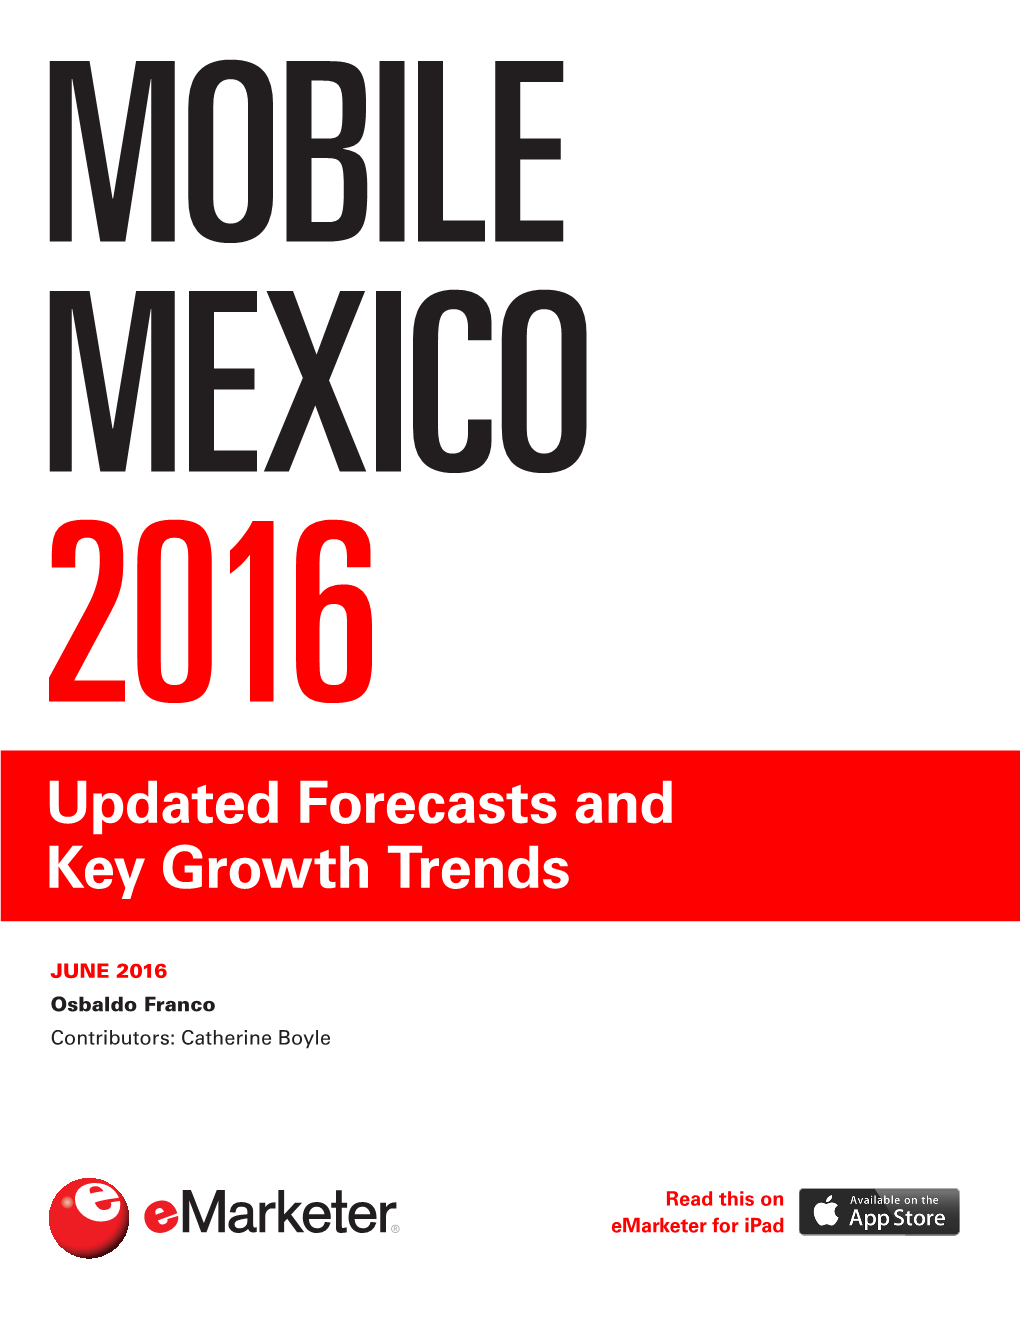 Updated Forecasts and Key Growth Trends